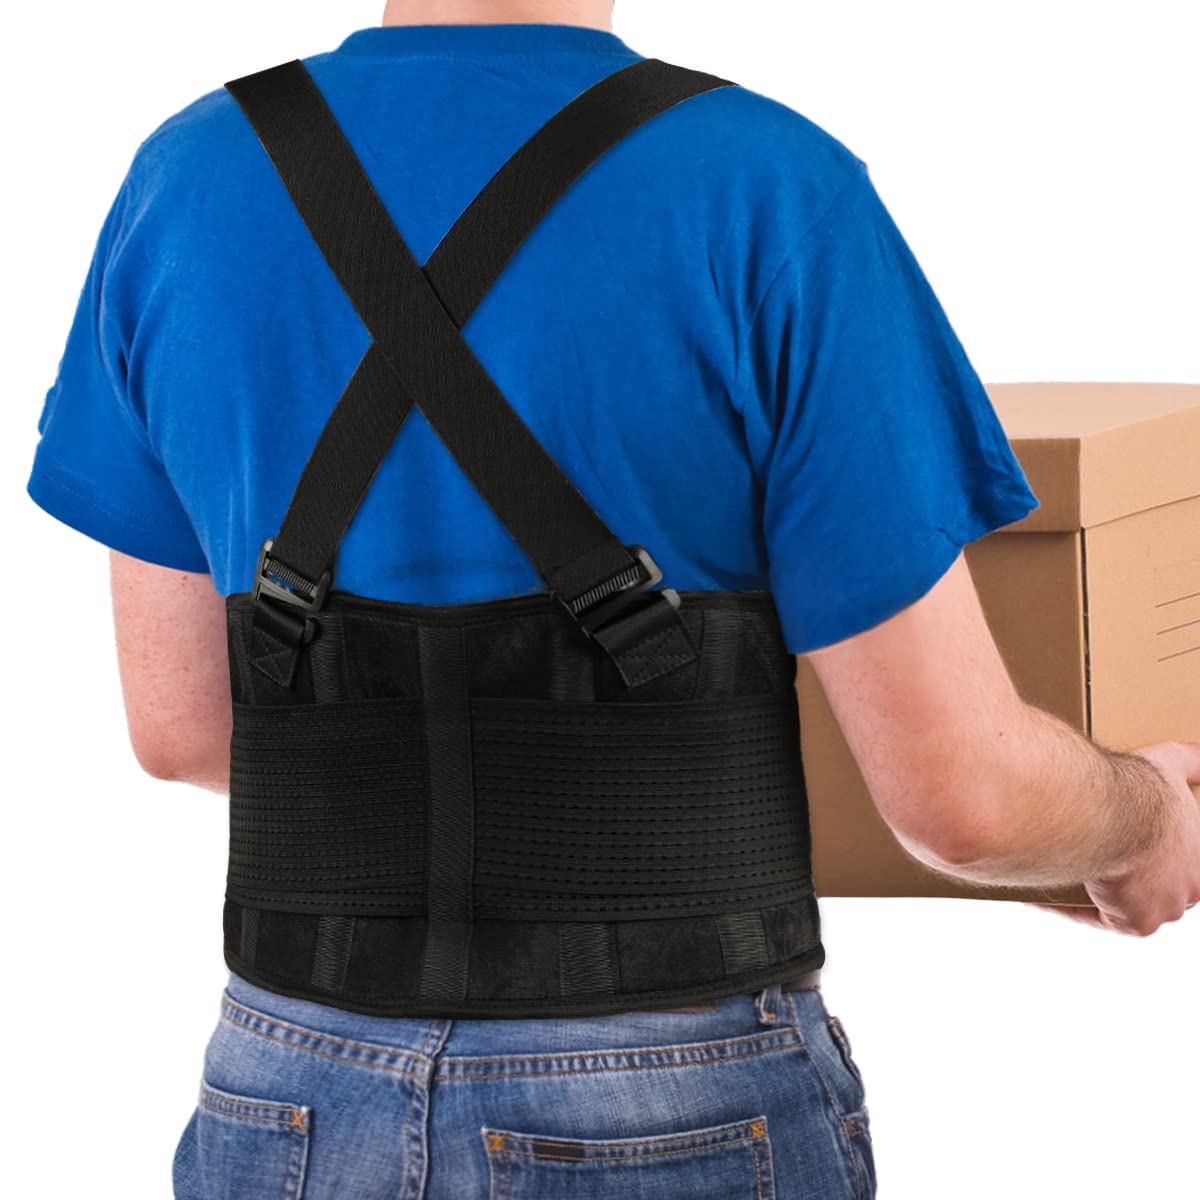 Adjustable Work Lumbar Back Support Belt With Detachable Suspenders For Back  Pain Relief, Injury Recovery, Heavy Lifting Support - Waist Support -  AliExpress